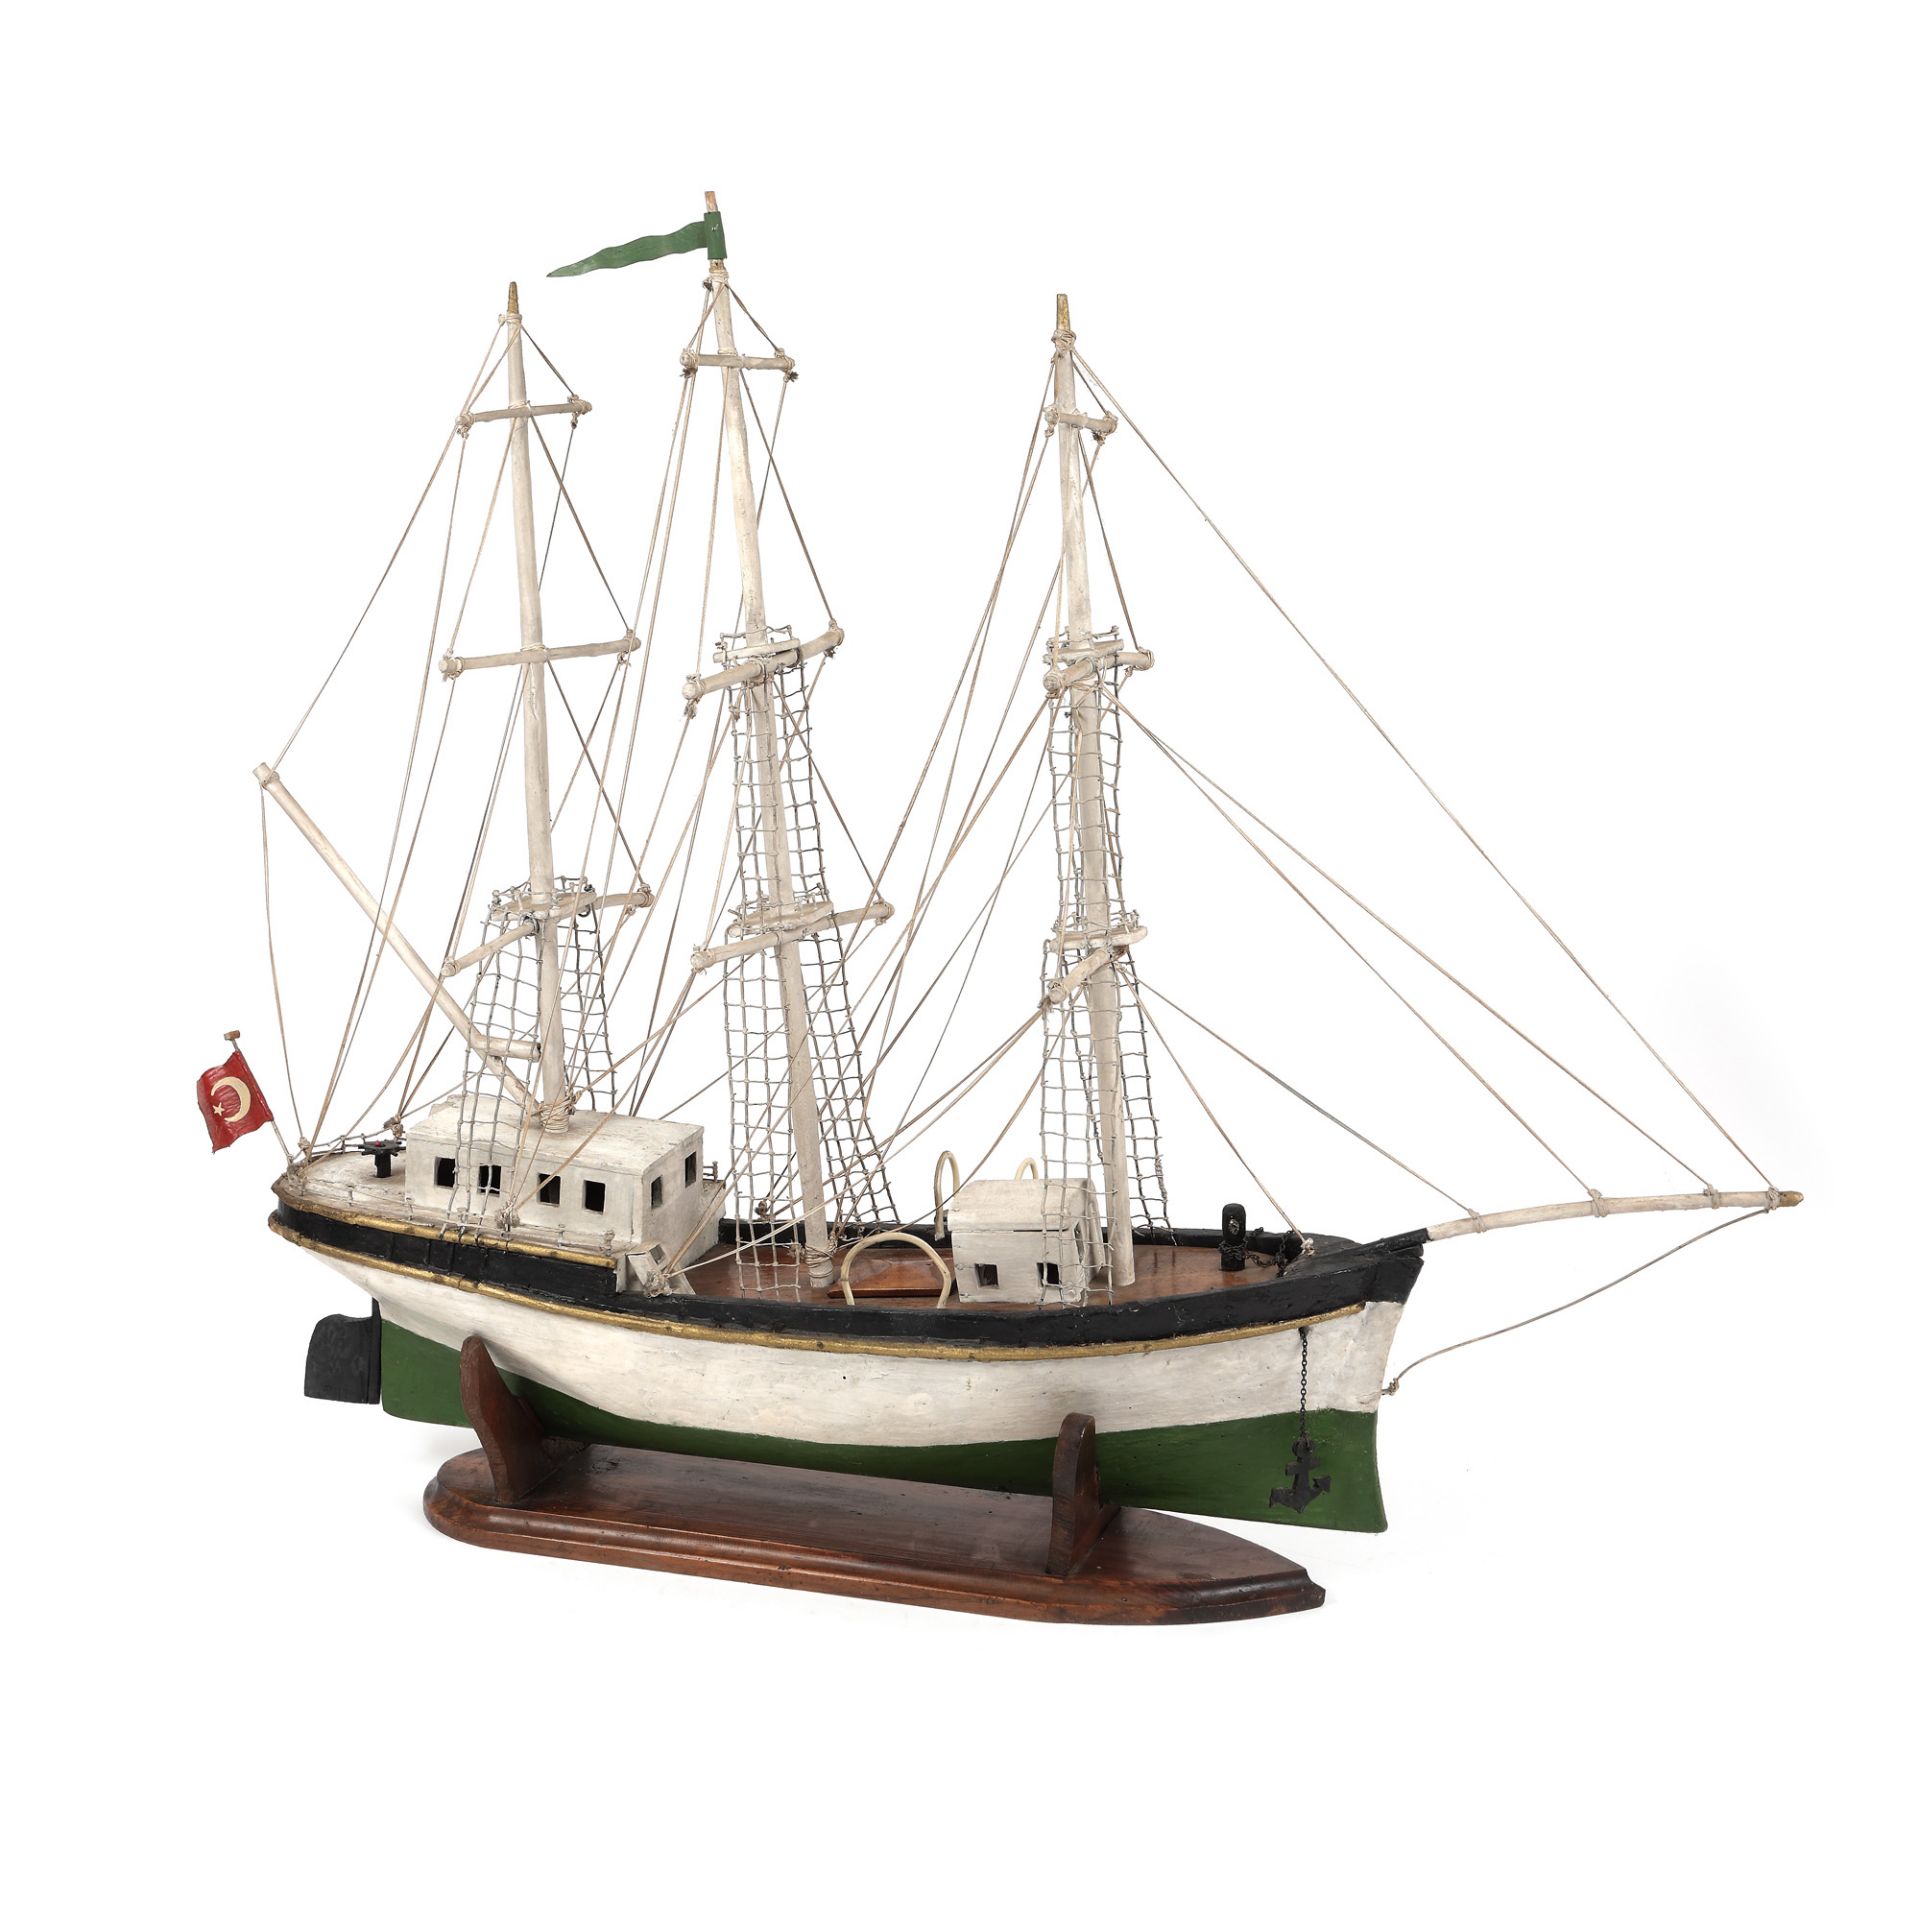 Turkish brig model, painted wood, approx. 1940-1950